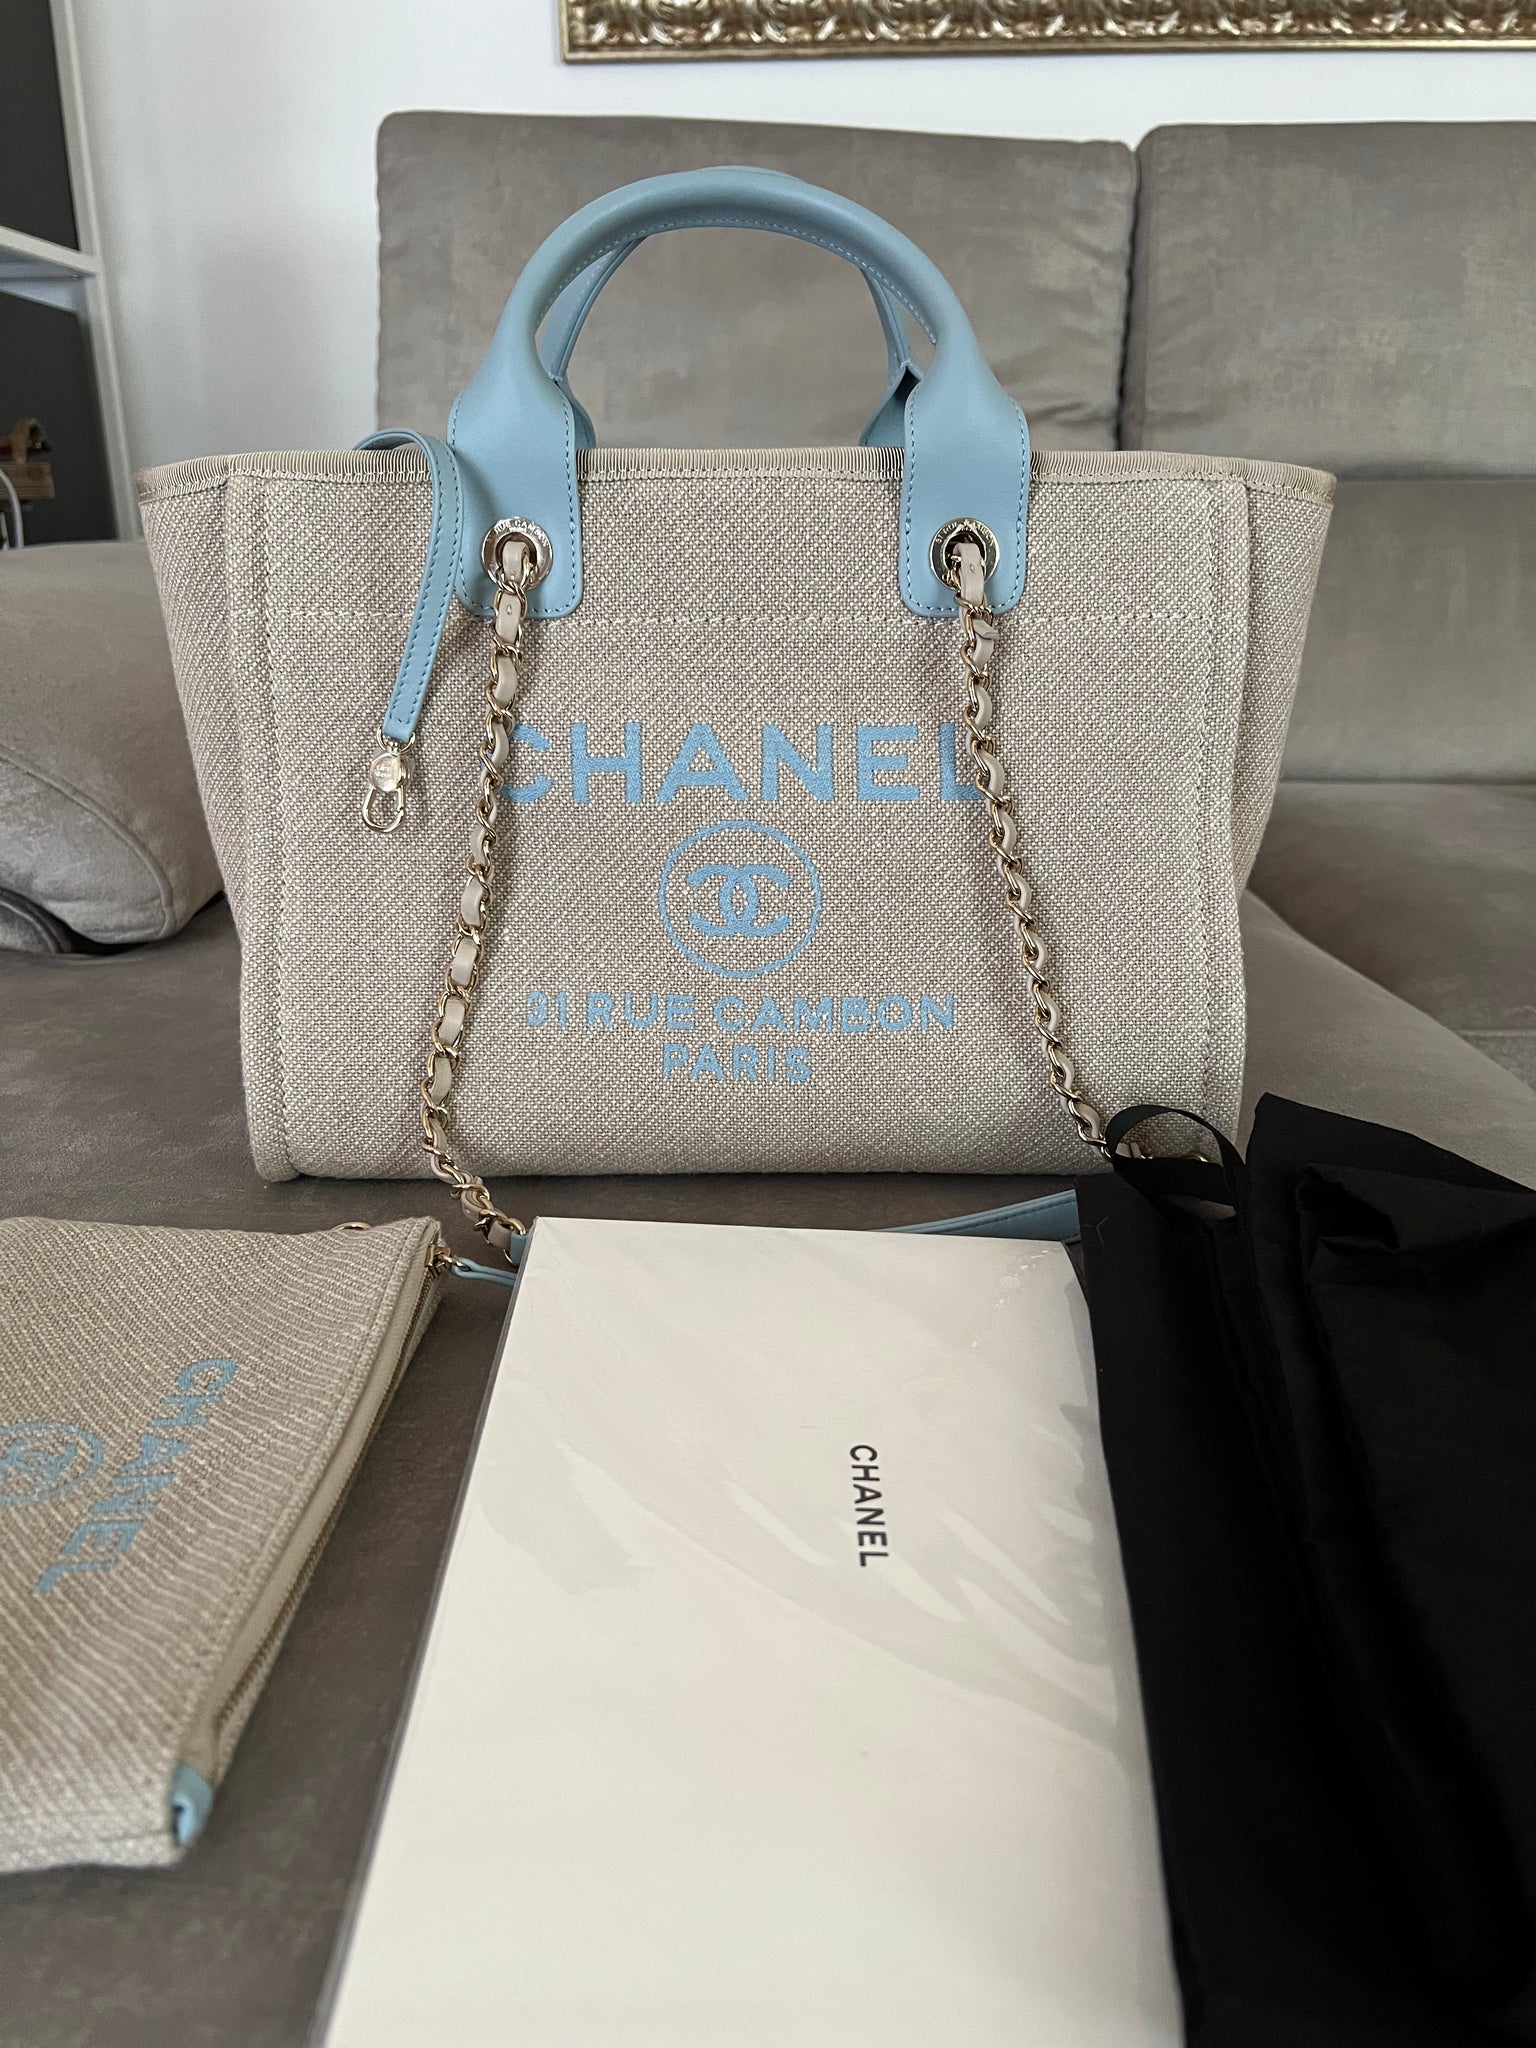 Chanel Deauville Tote w/ Pouch